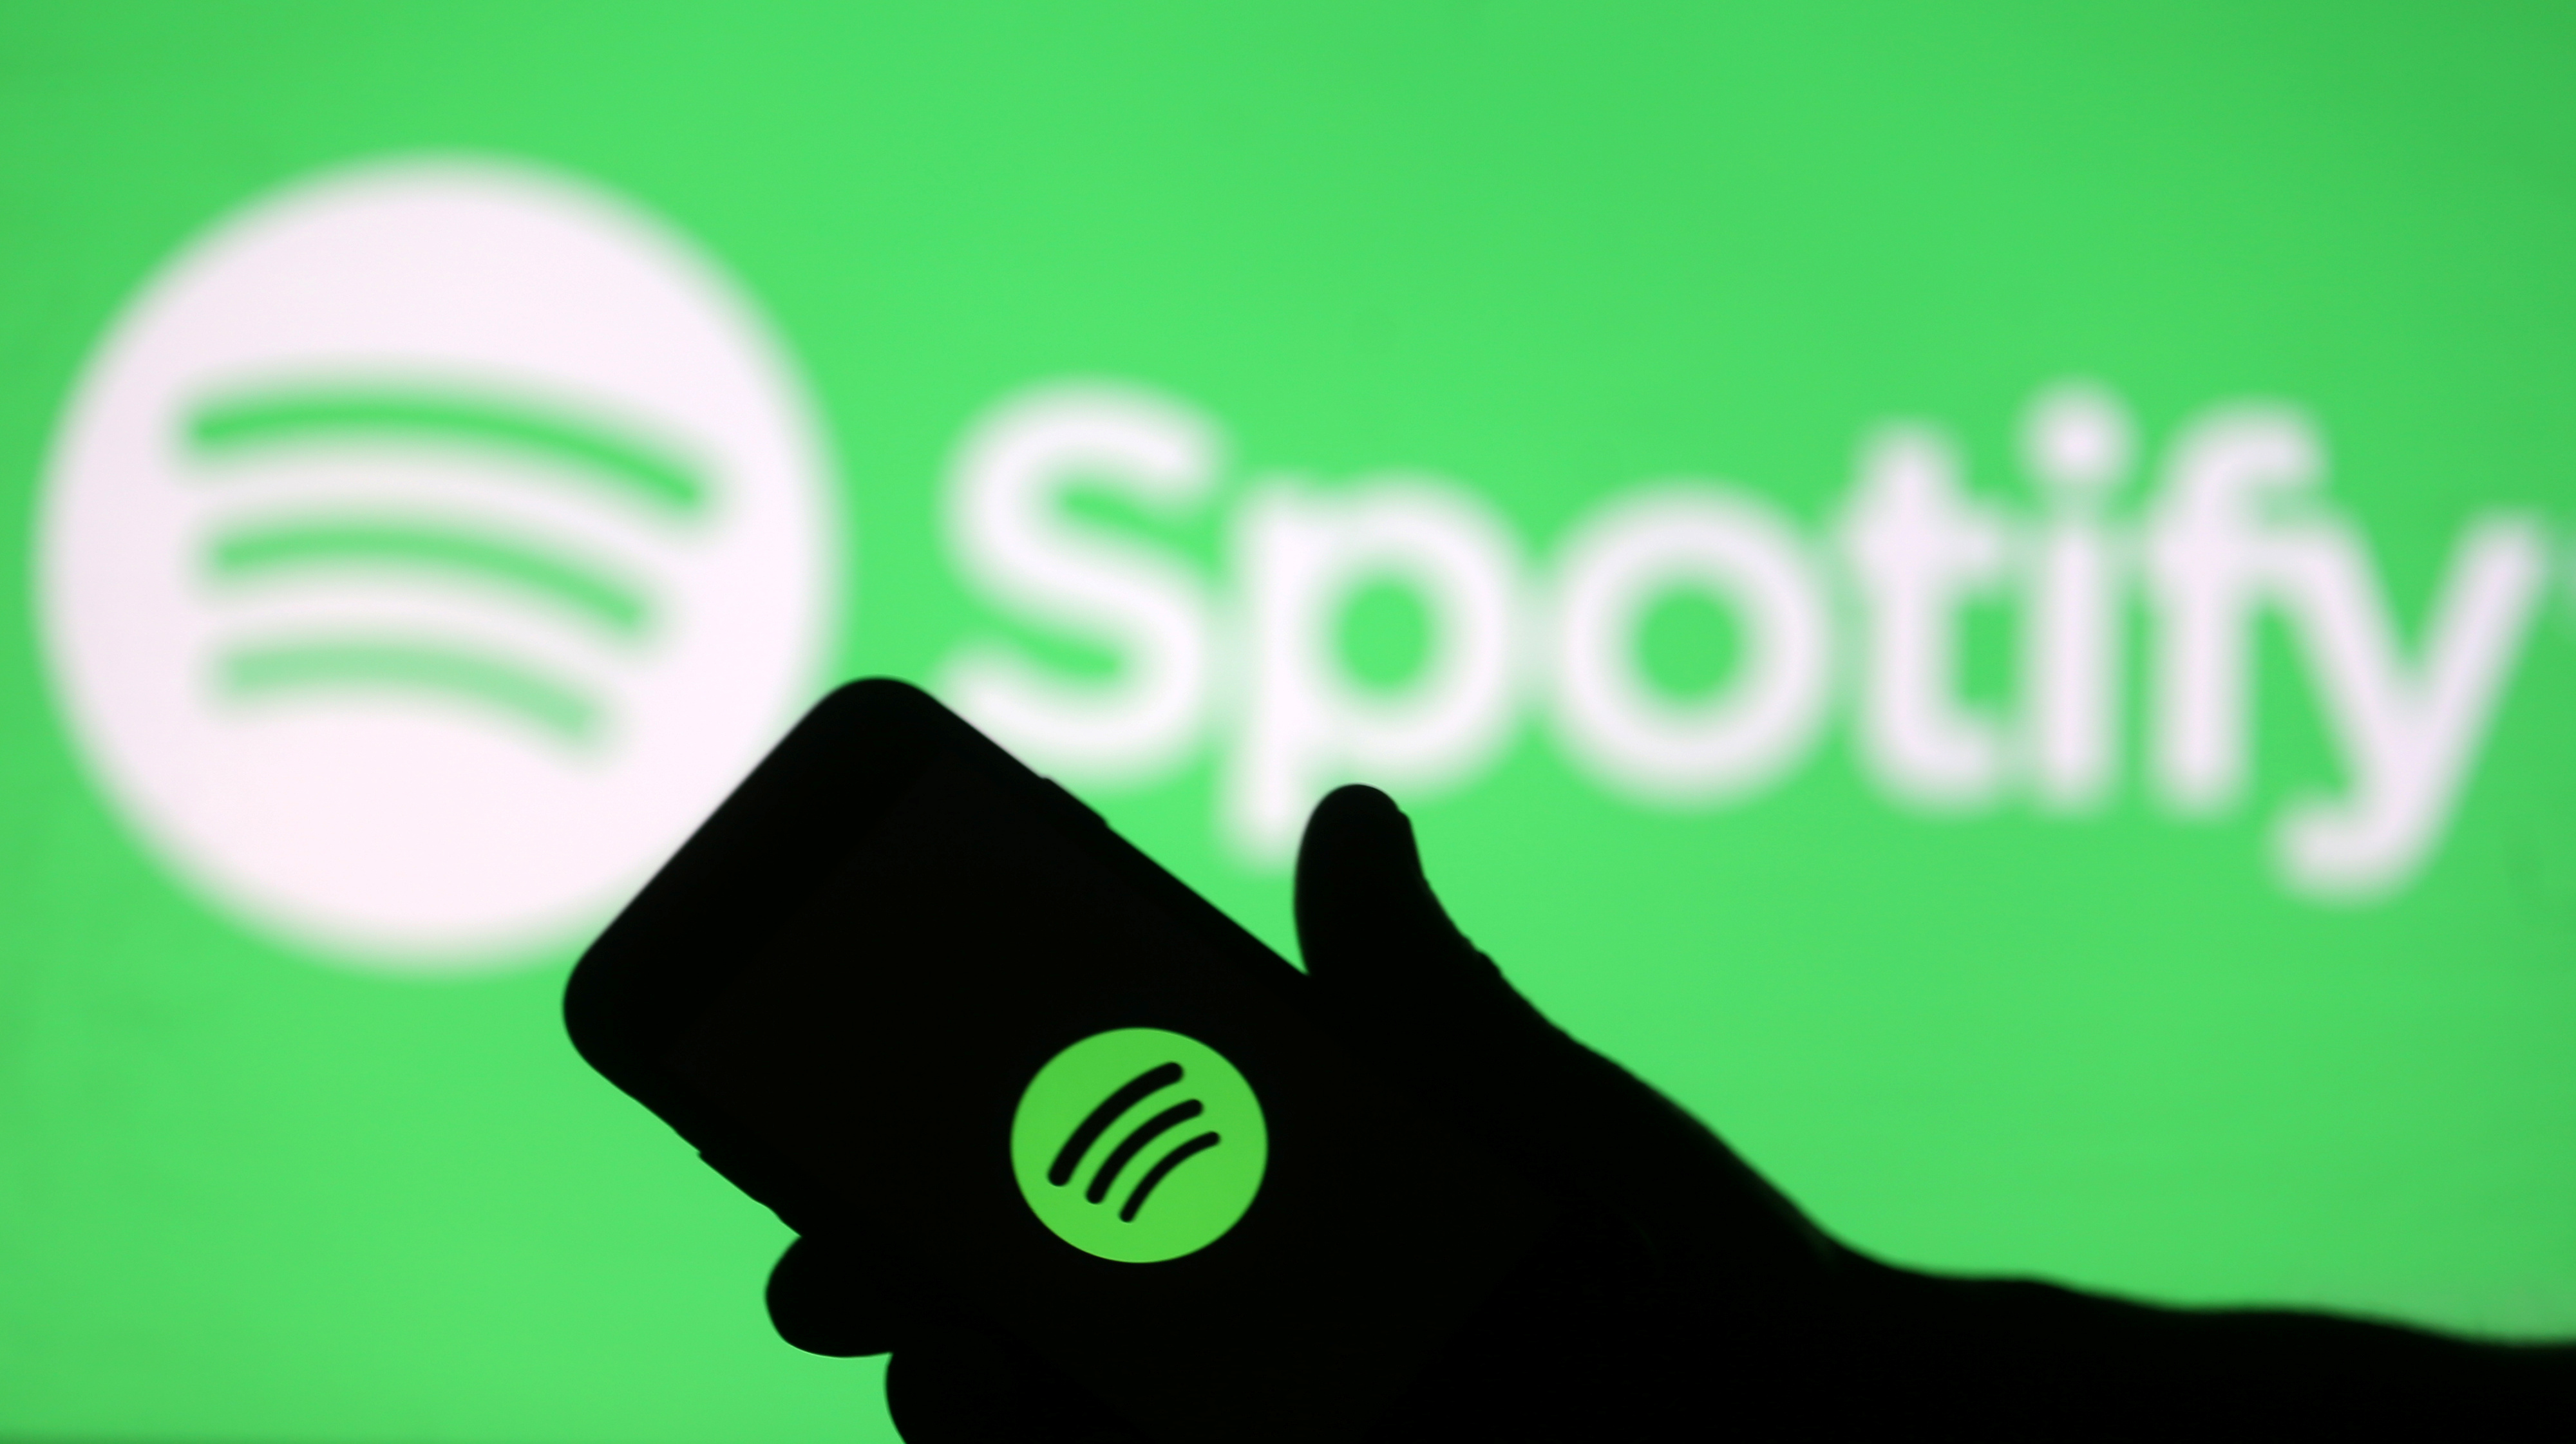 A smartphone is seen in front of a screen projection of Spotify logo, in this picture illustration taken April 1, 2018. REUTERS/Dado Ruvic/Illustration